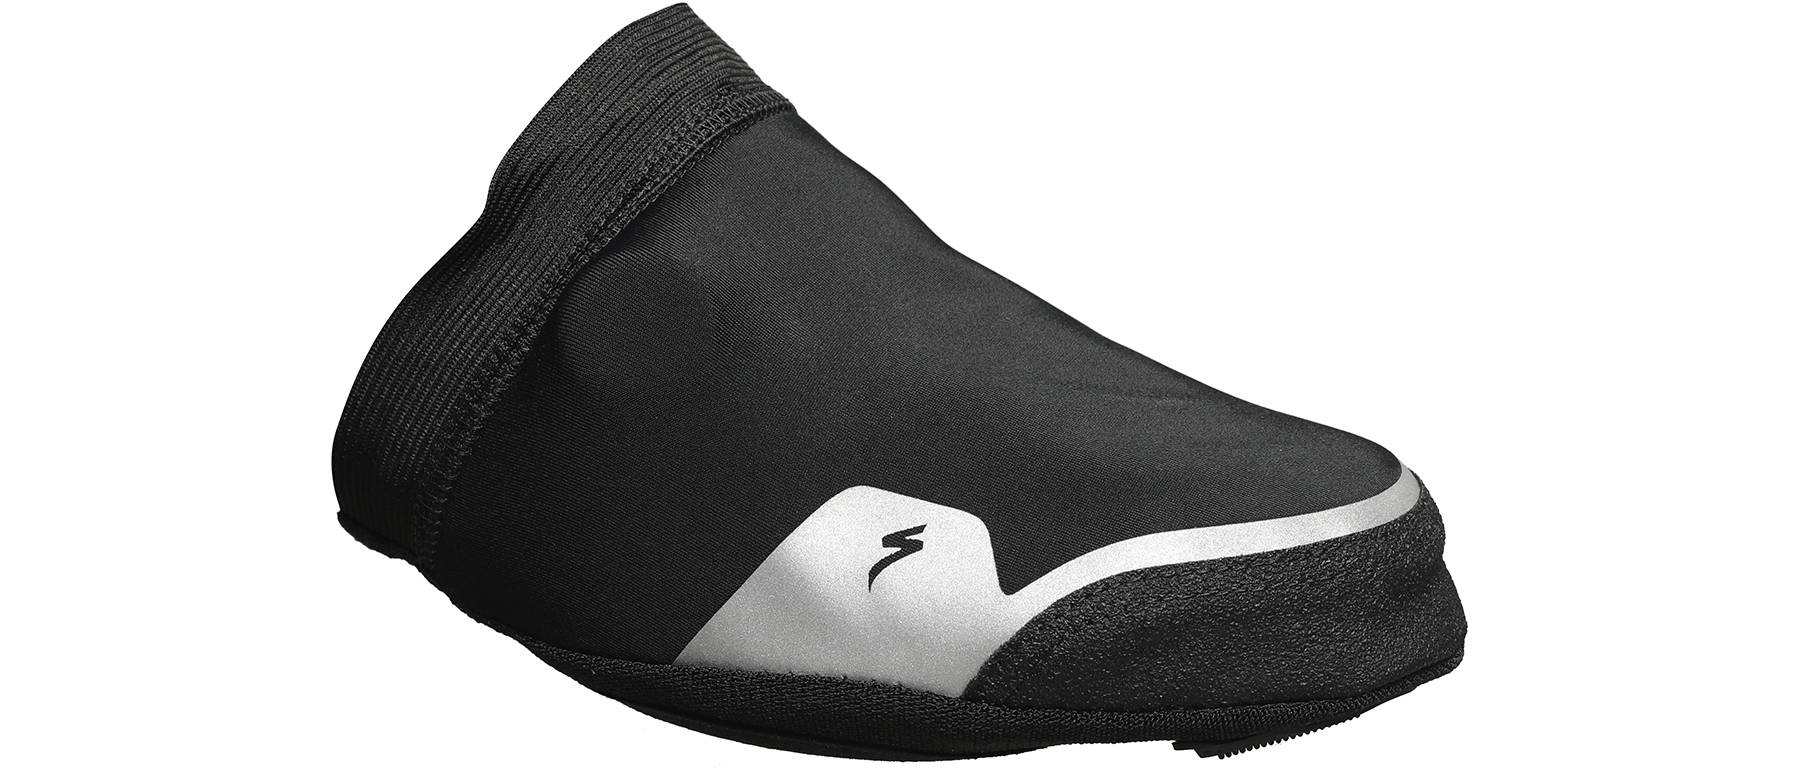 Specialized Softshell Toe Cover